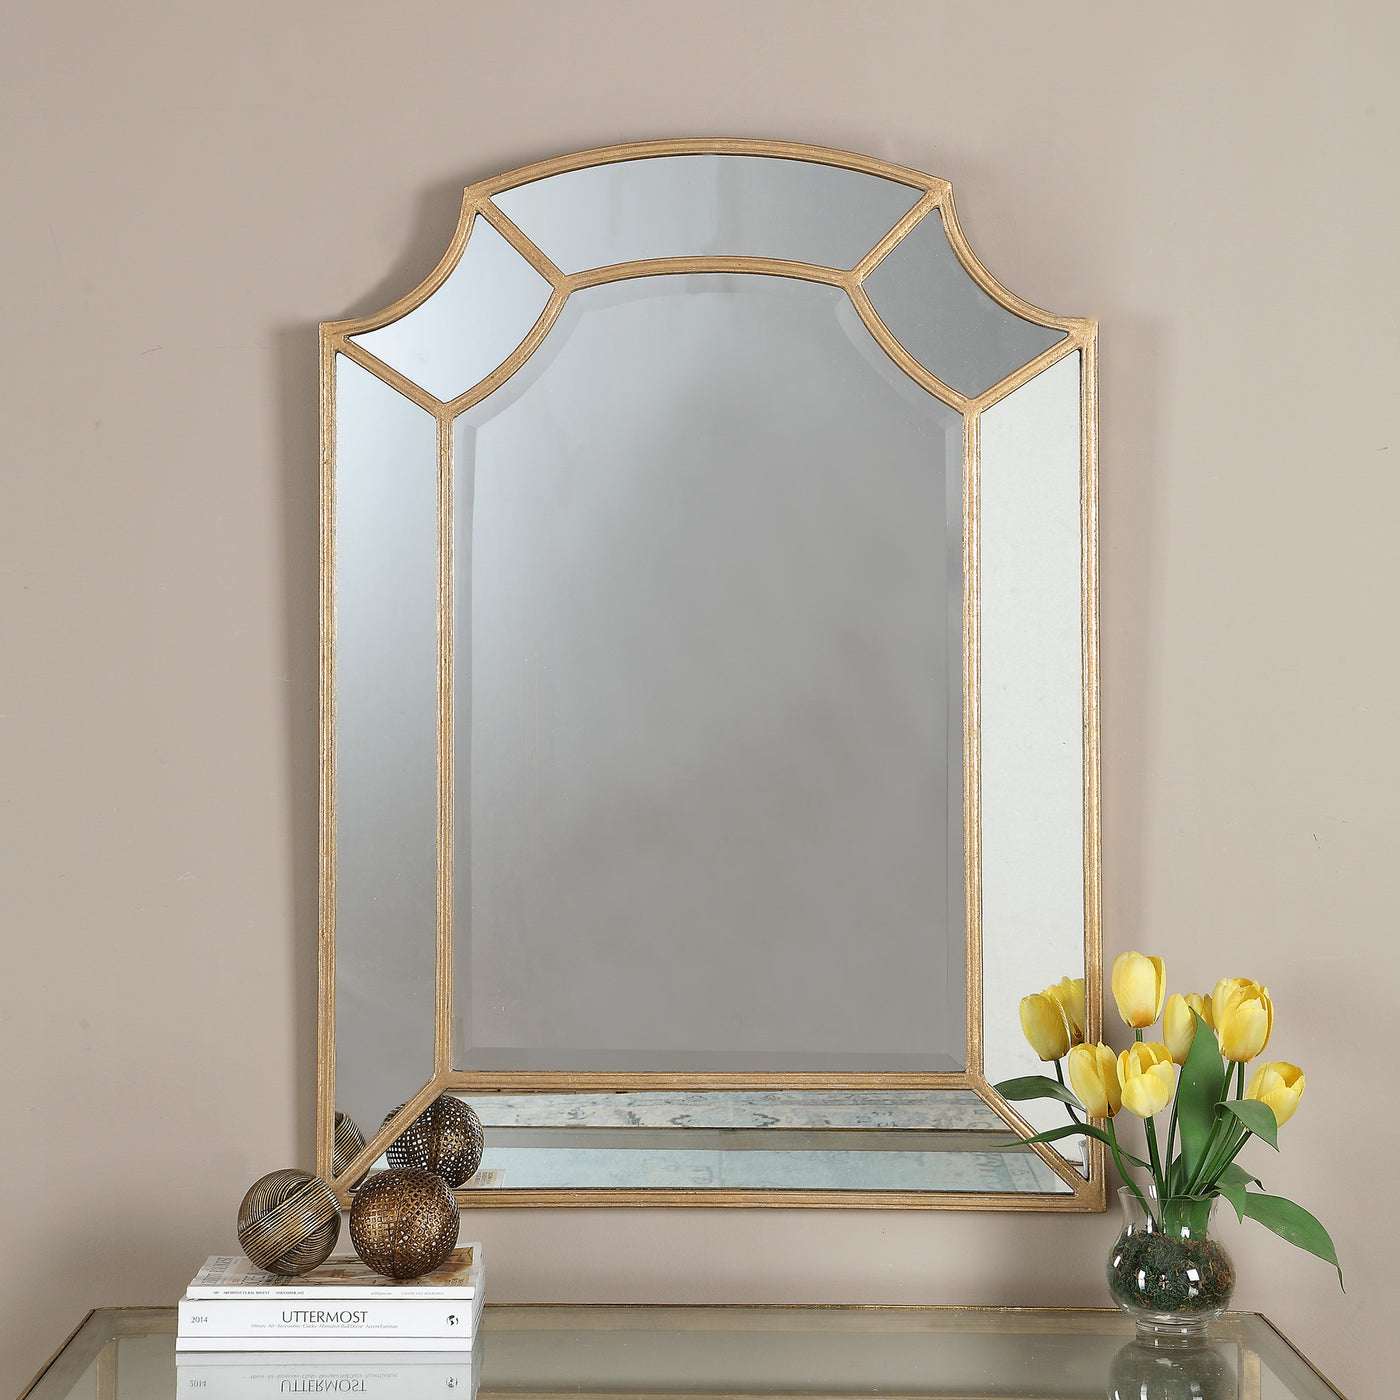 Hand Forged Metal Arch Frame With Scooped Corners, Has A Lightly Antiqued Gold Leaf Finish. Mirror Has A Generous 1 1/4" B...